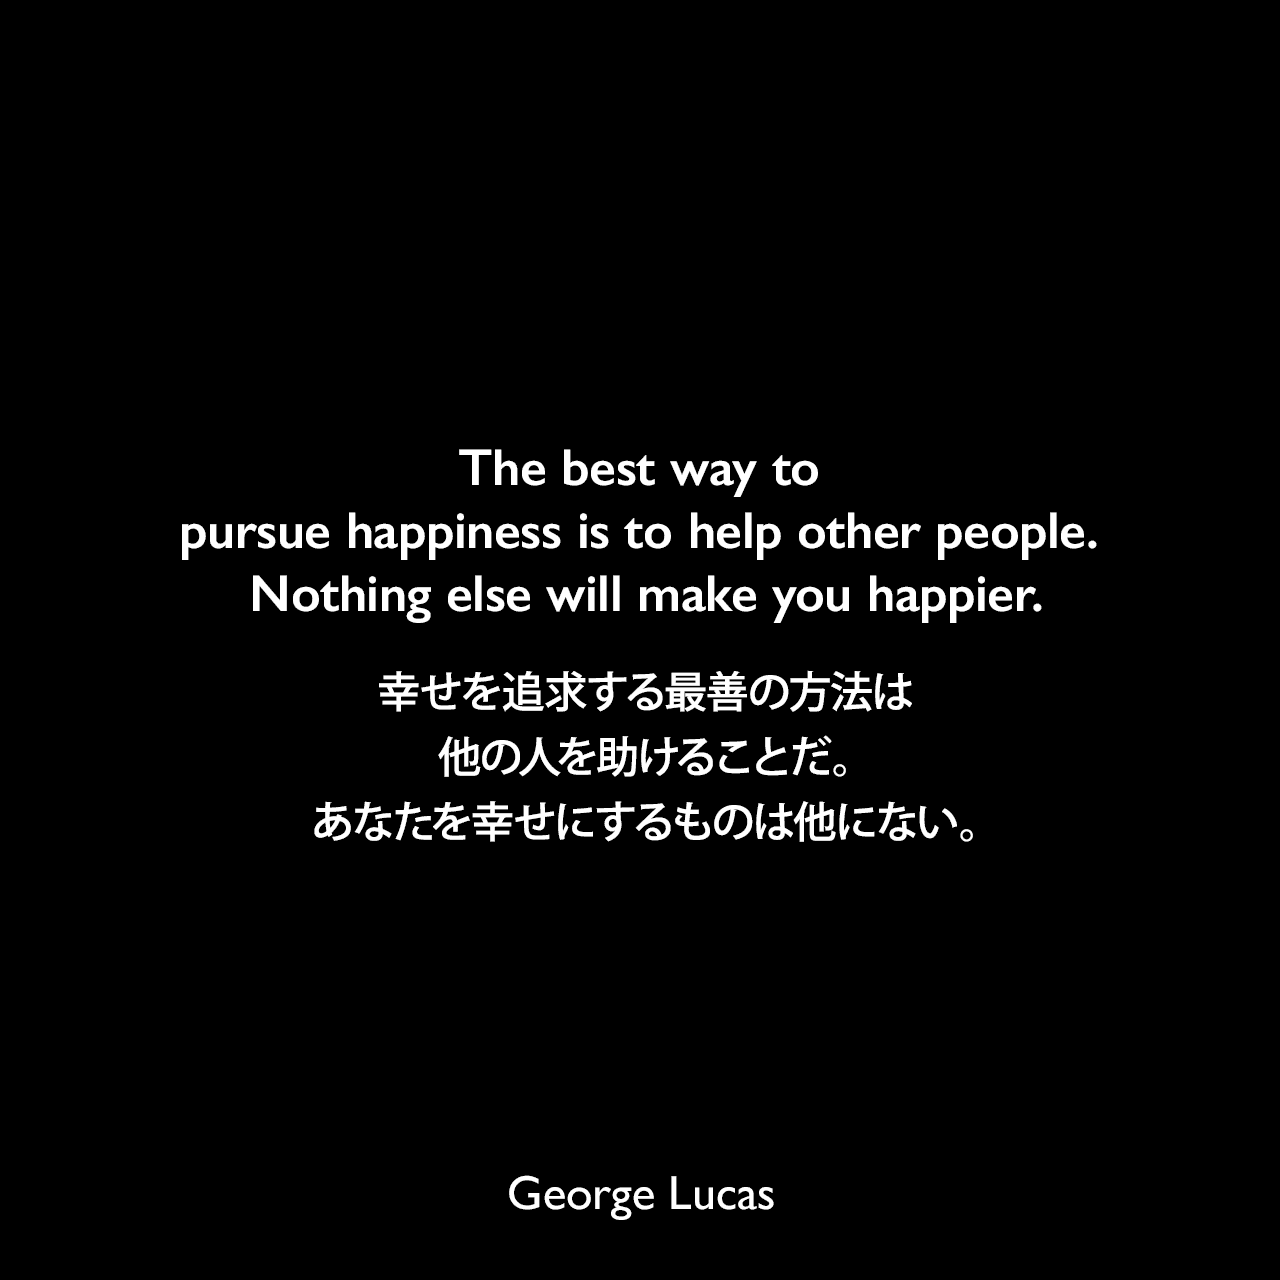 The best way to pursue happiness is to help other people. Nothing else will make you happier.幸せを追求する最善の方法は、他の人を助けることだ。あなたを幸せにするものは他にない。George Lucas